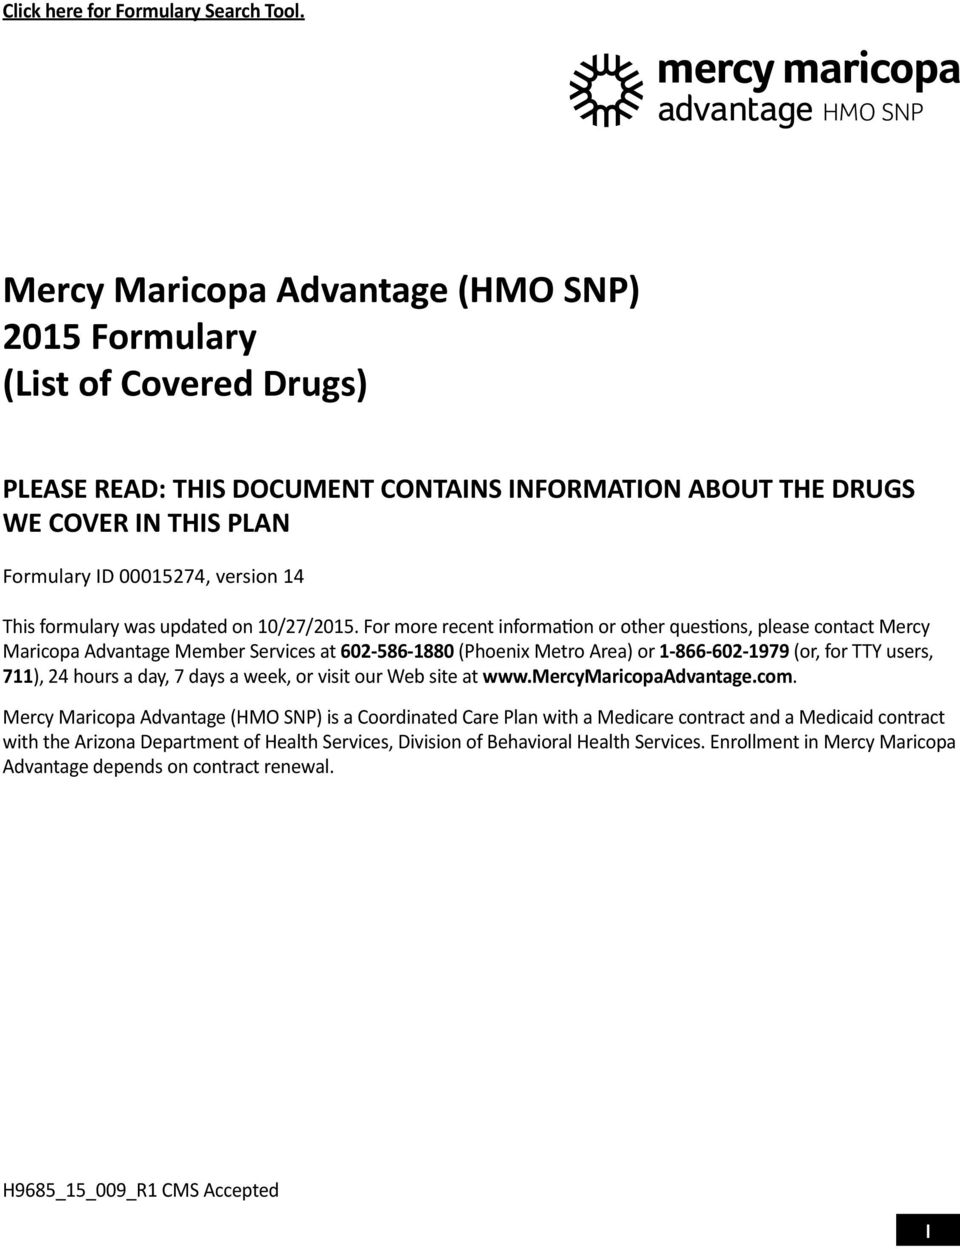 formulary was updated on 10/27/2015.